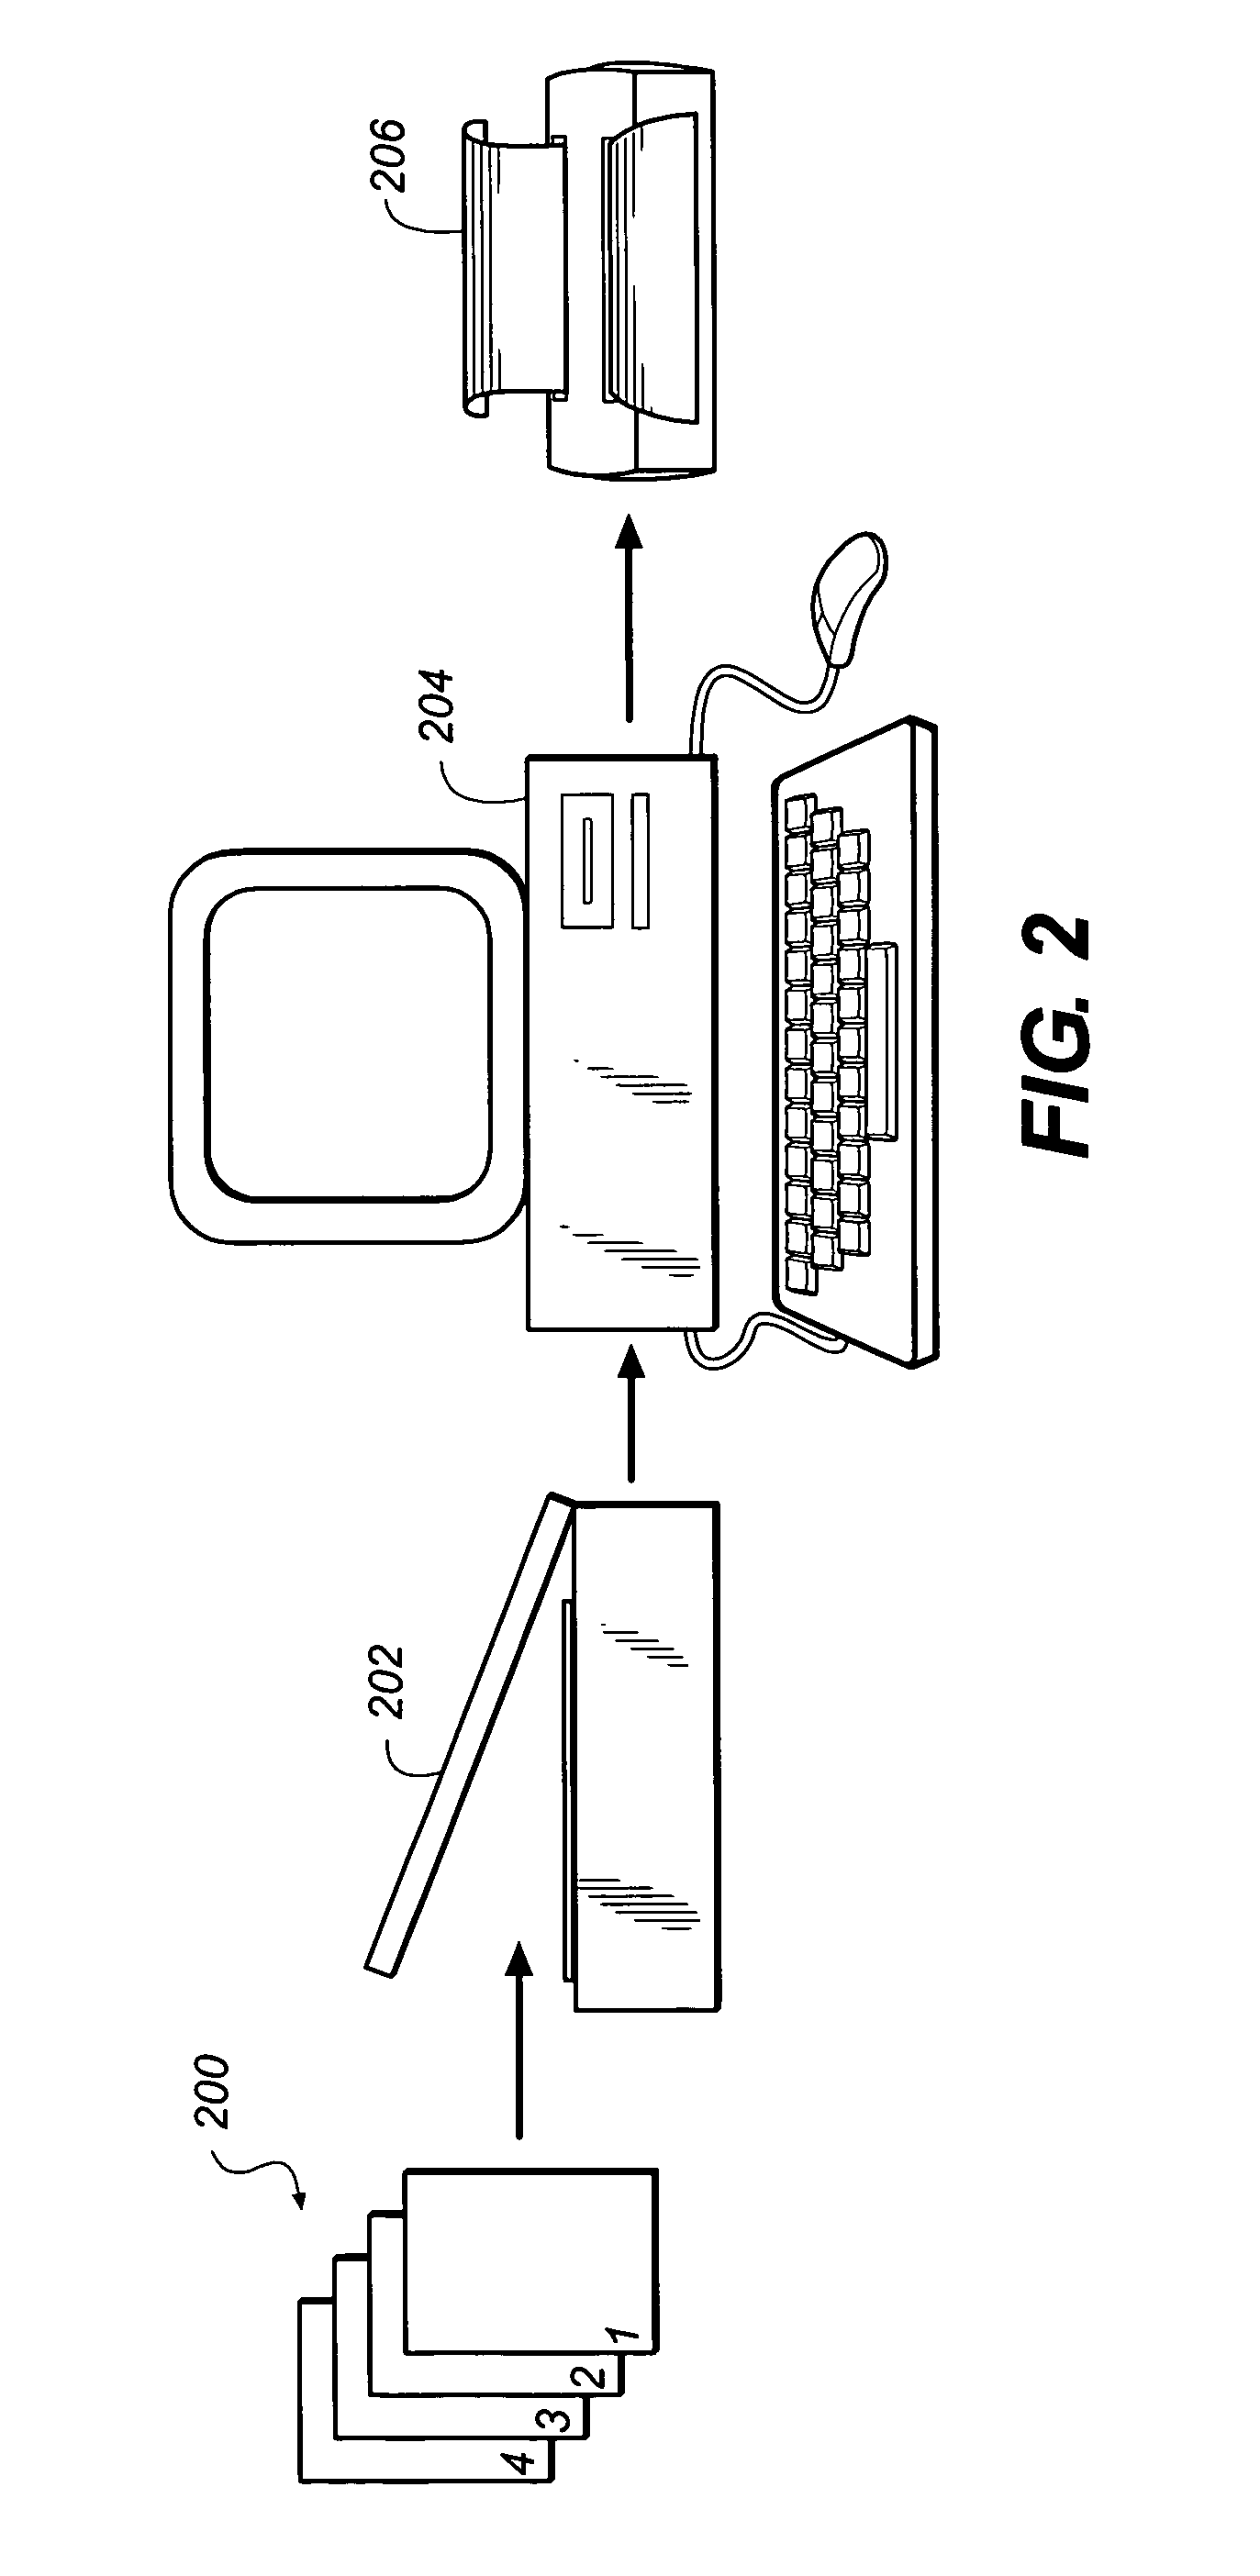 Method for selecting an emphasis image from an image collection based upon content recognition